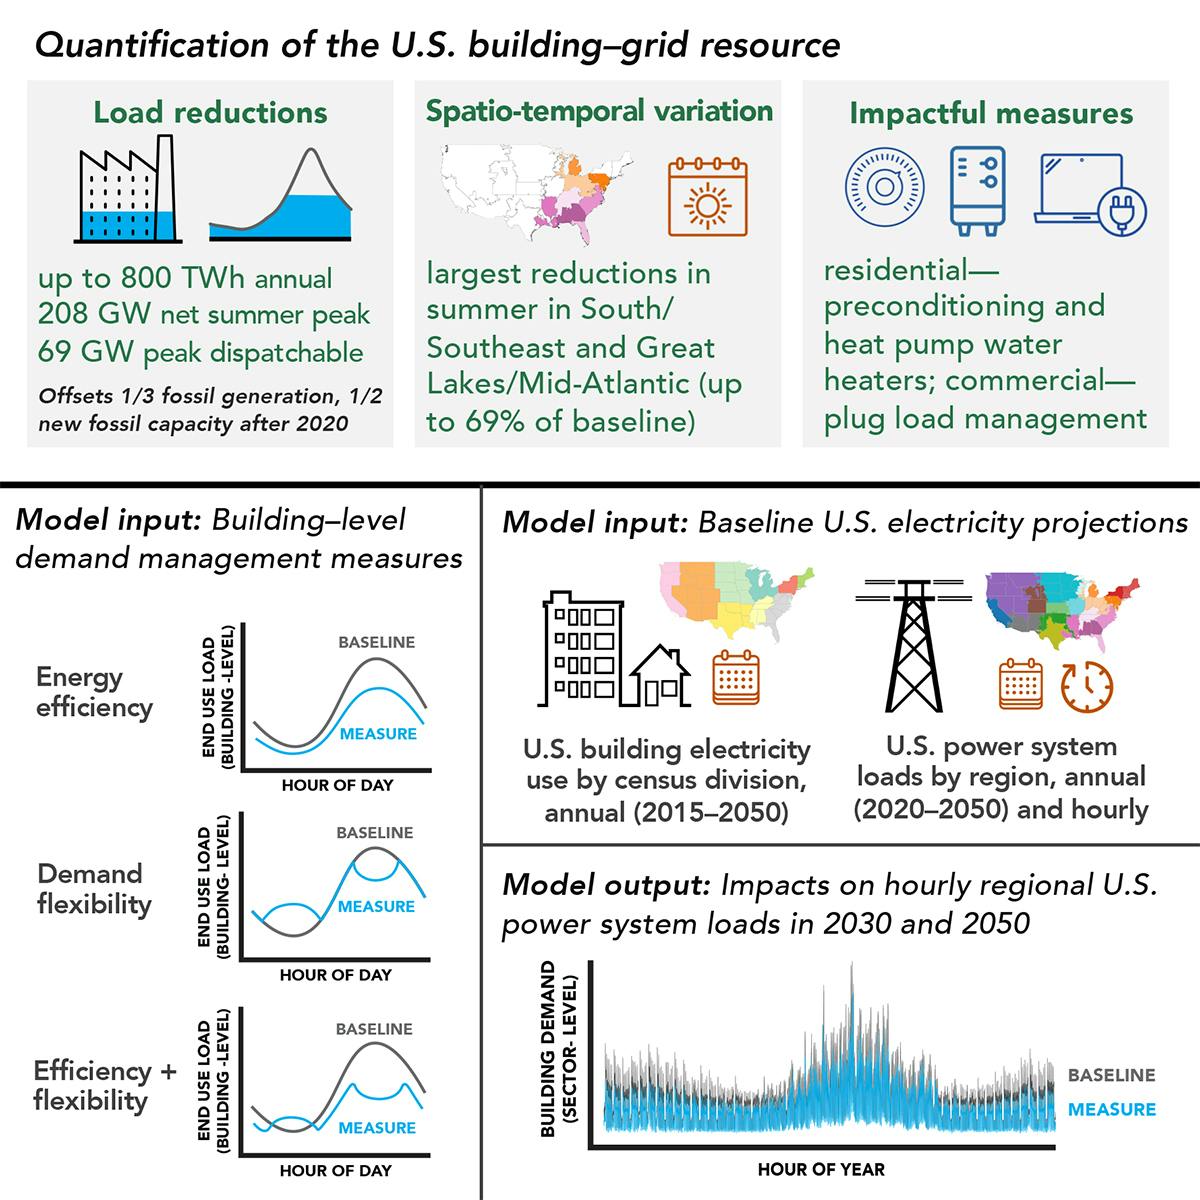 Deploying certain technologies to manage energy demand in buildings has the potential to avoid the need for up to one-third of coal- or gas-fired power generation, according to a new study led by Berkeley Lab.